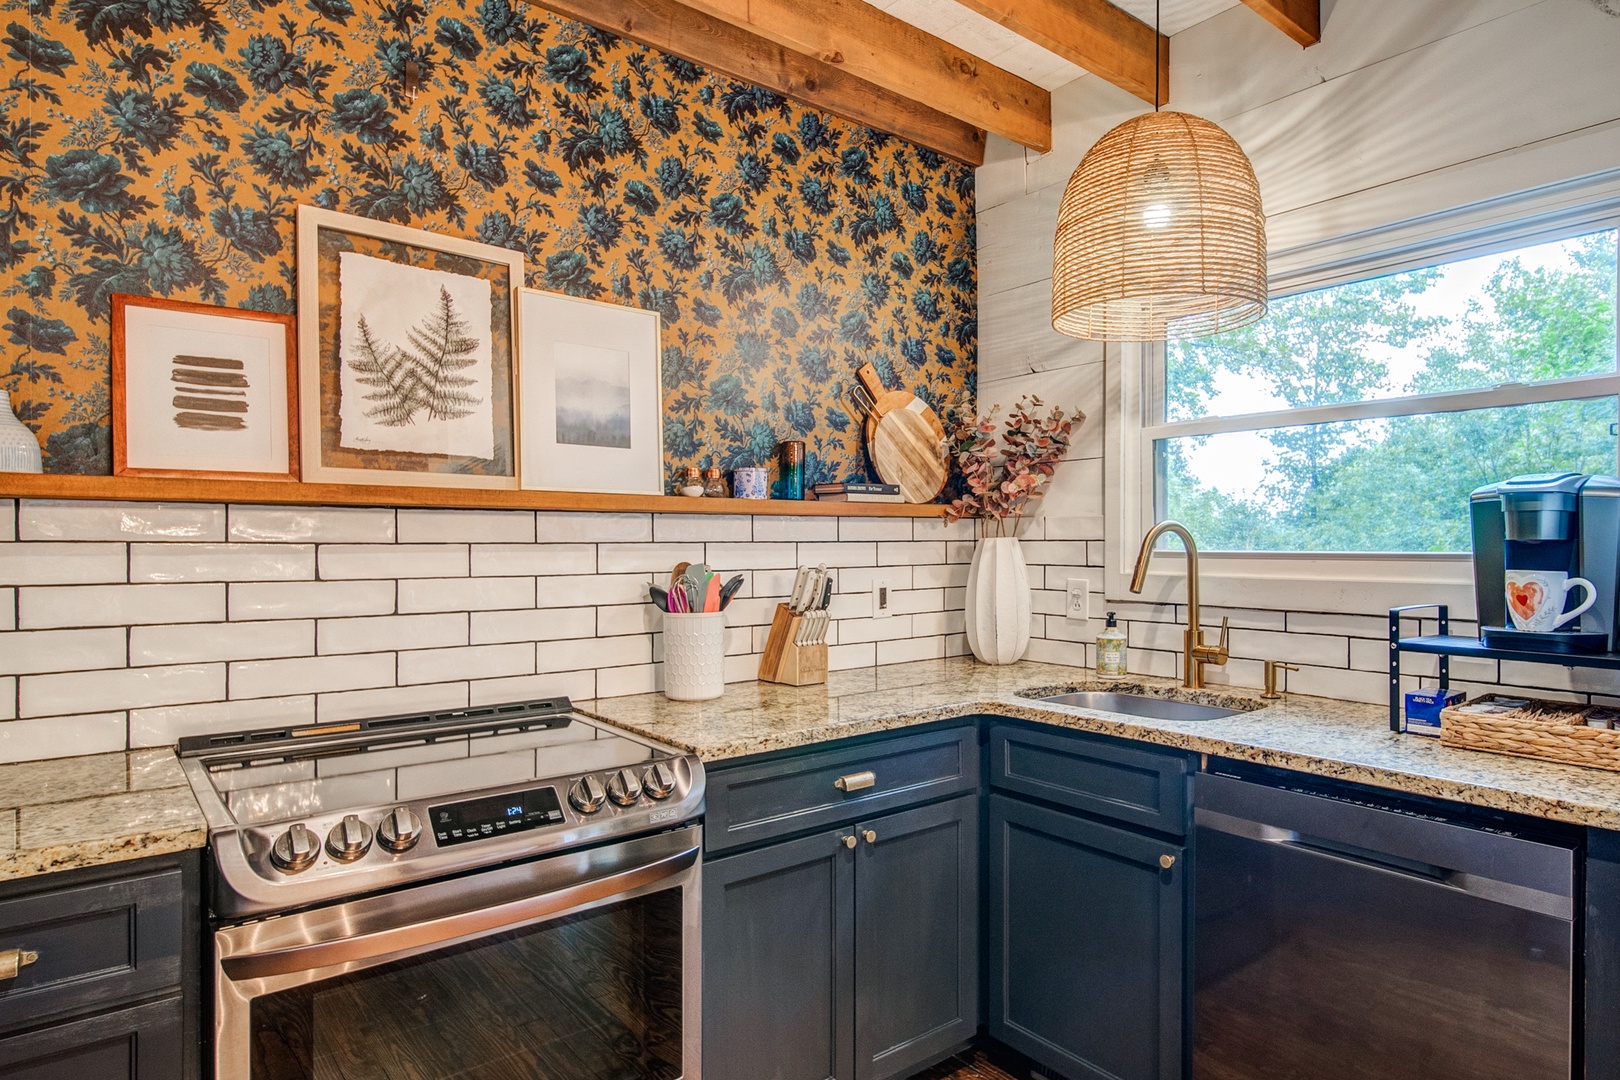 Guests are sure to love the fabulous décor and amenities of the open kitchen